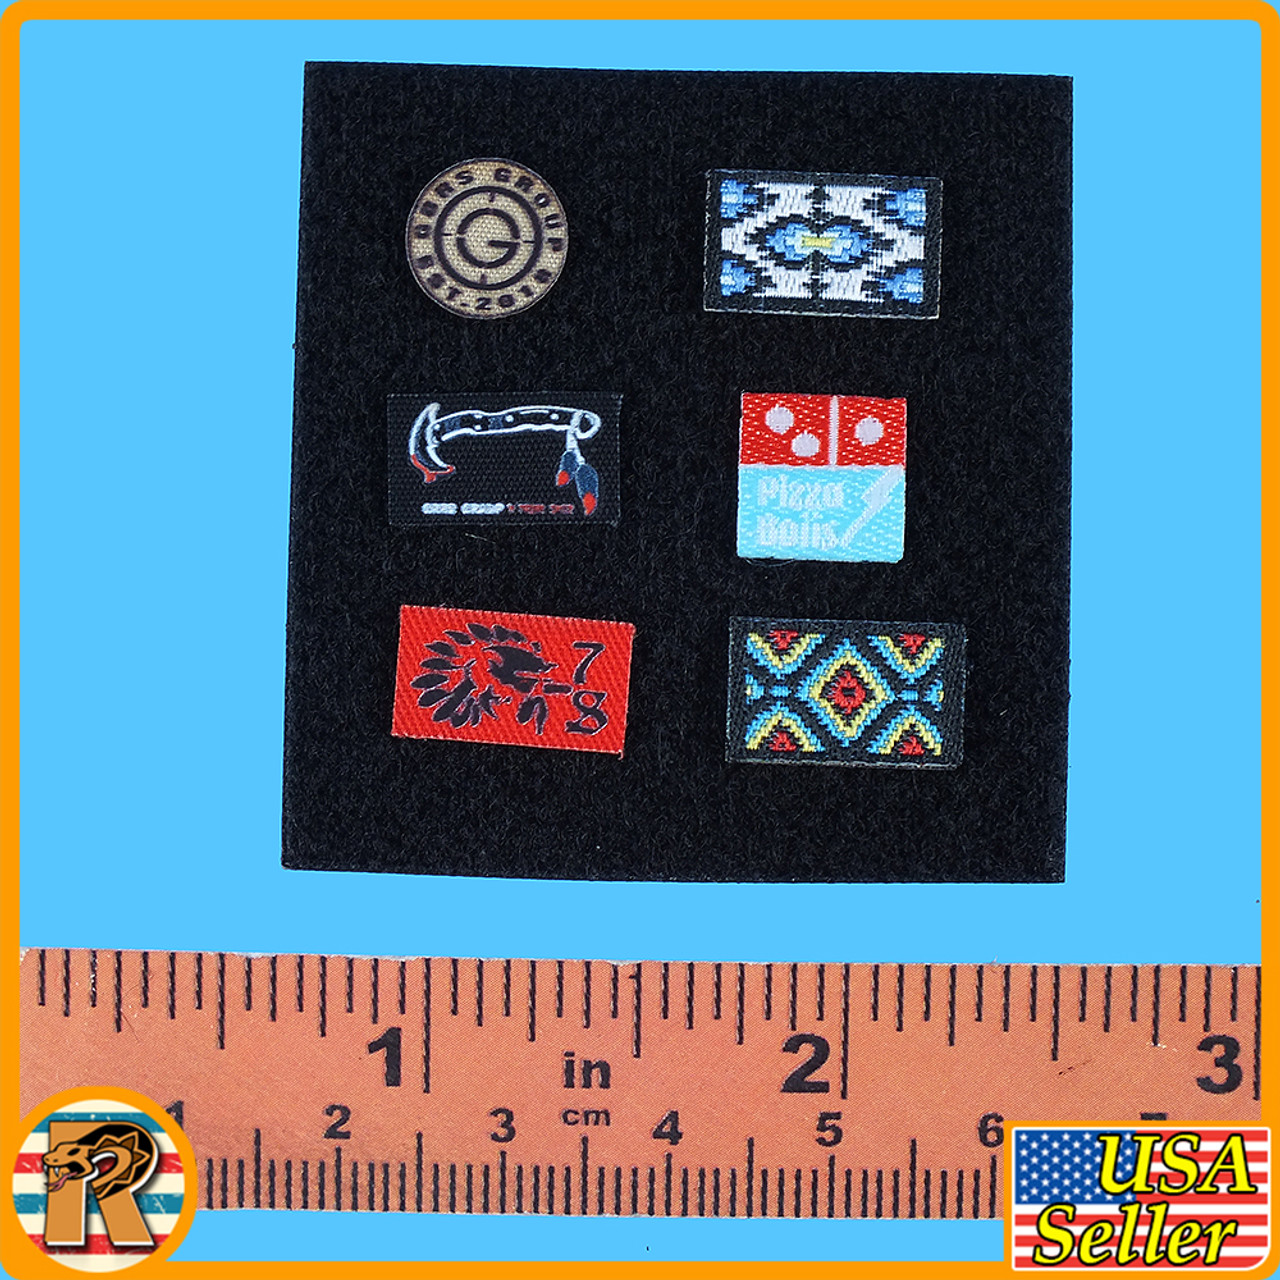 S Tactical Instructor Chpt 2 - Patches Set - 1/6 Scale